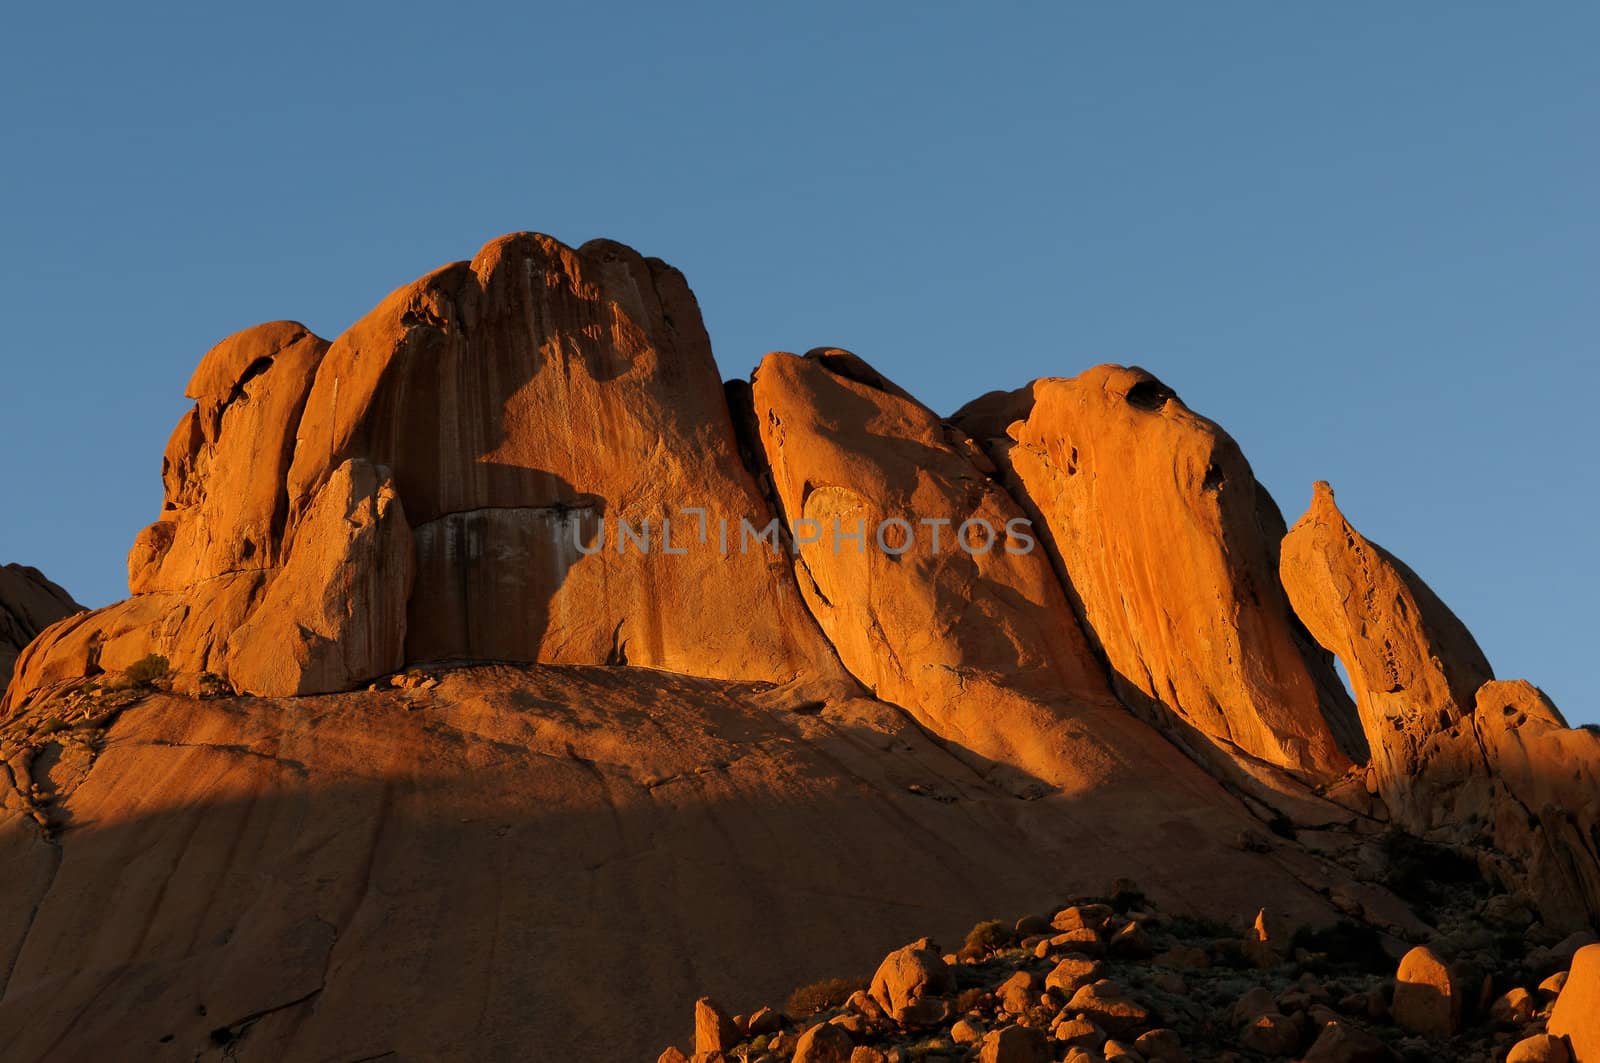 Panorama from three photos of the Spitzkoppe in Namibia